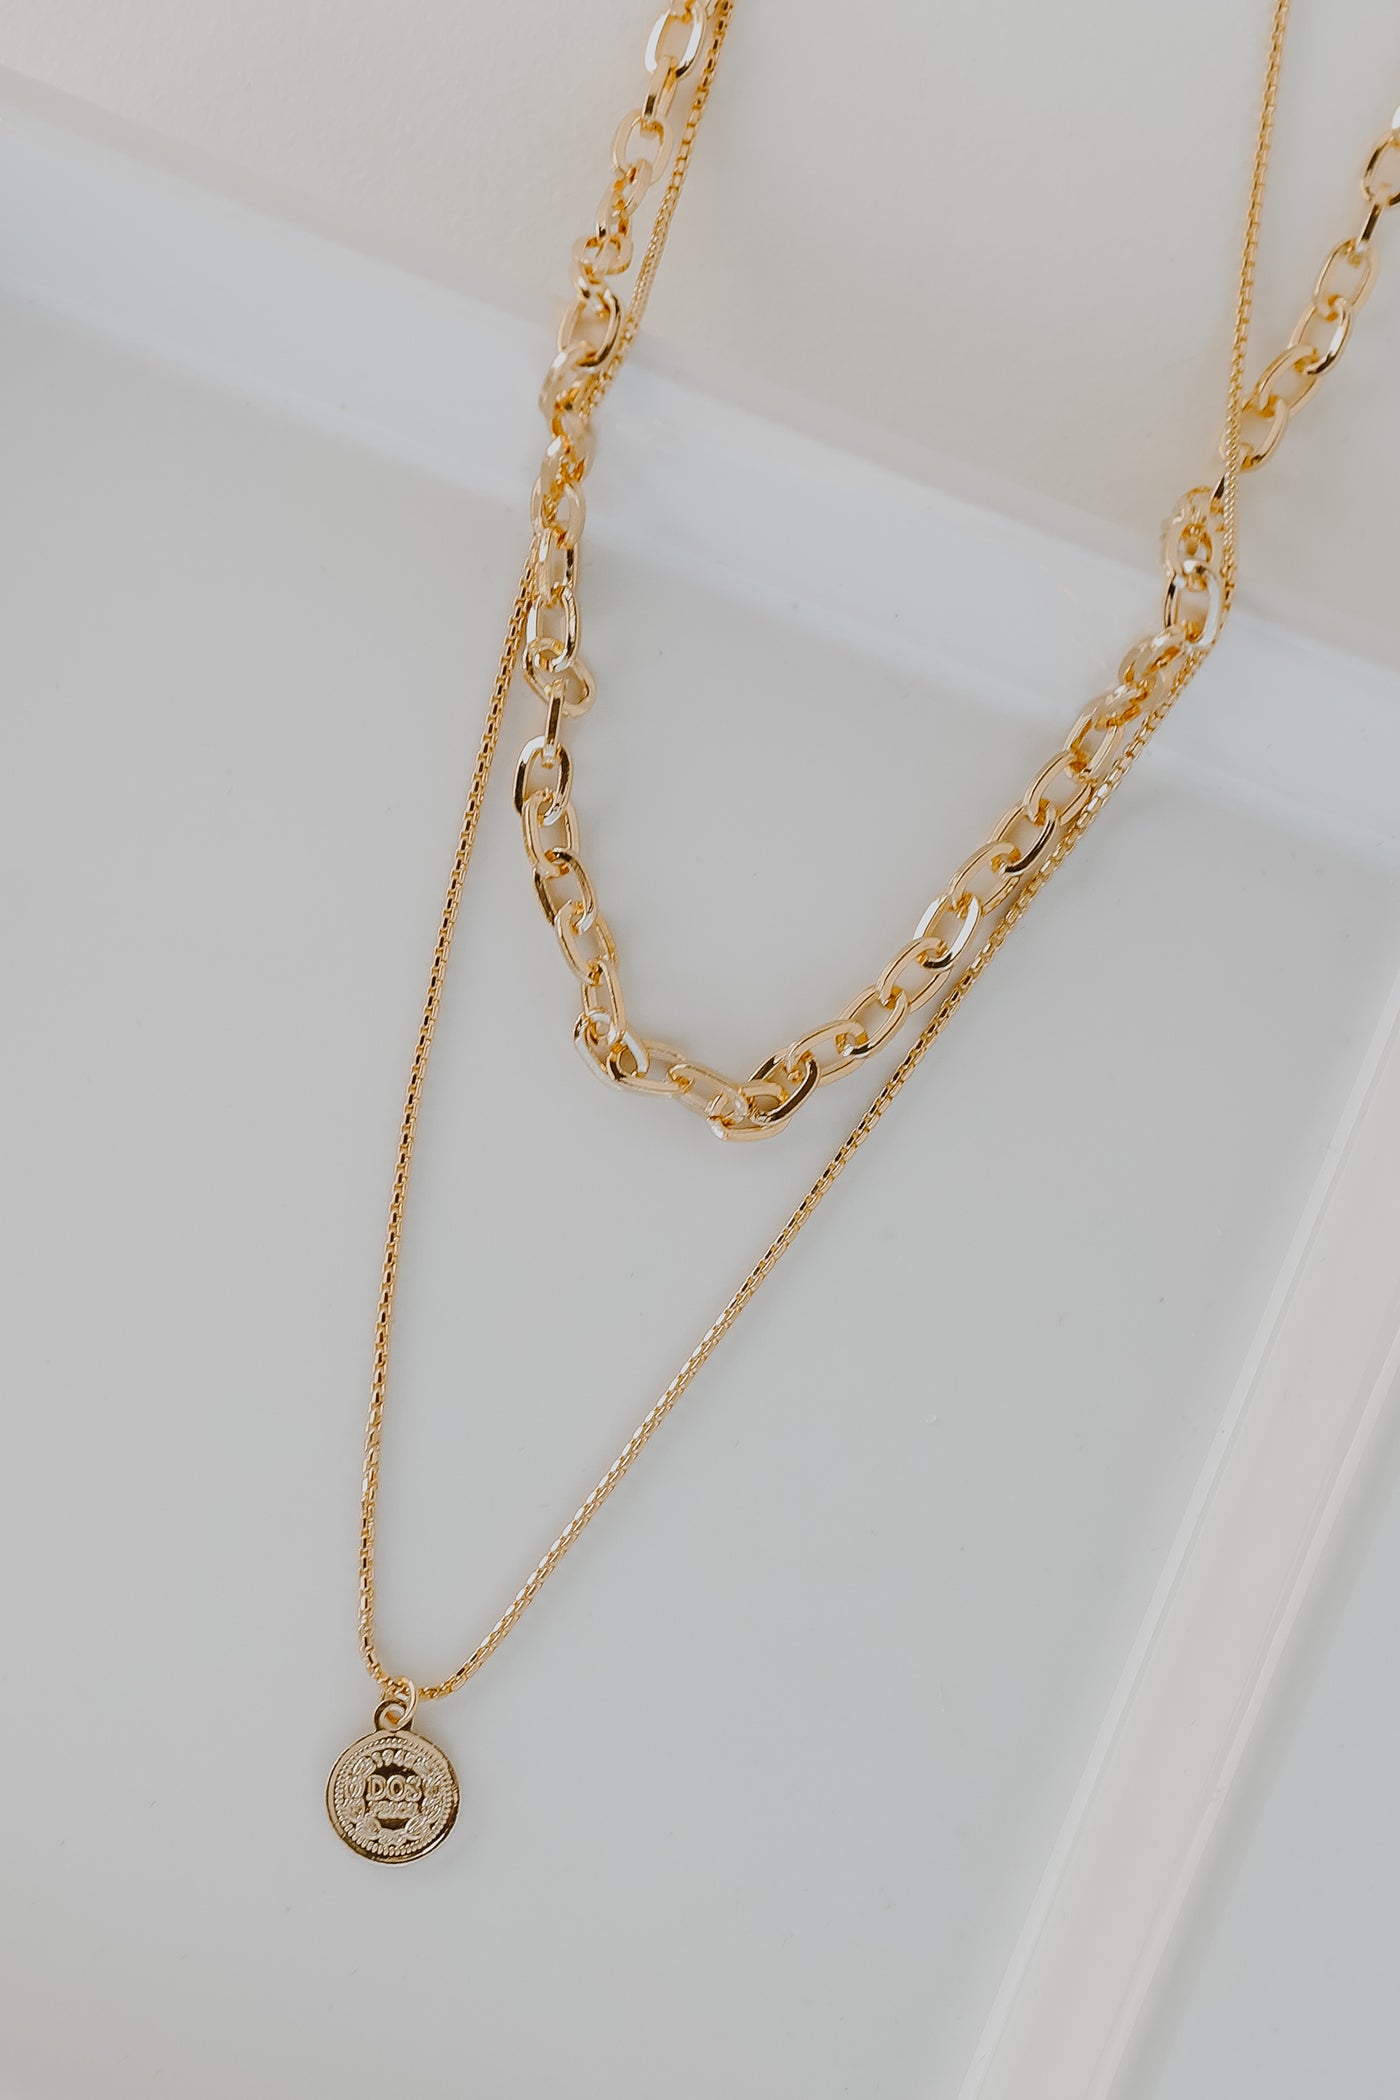 Gold Coin Layered Necklace from dress up